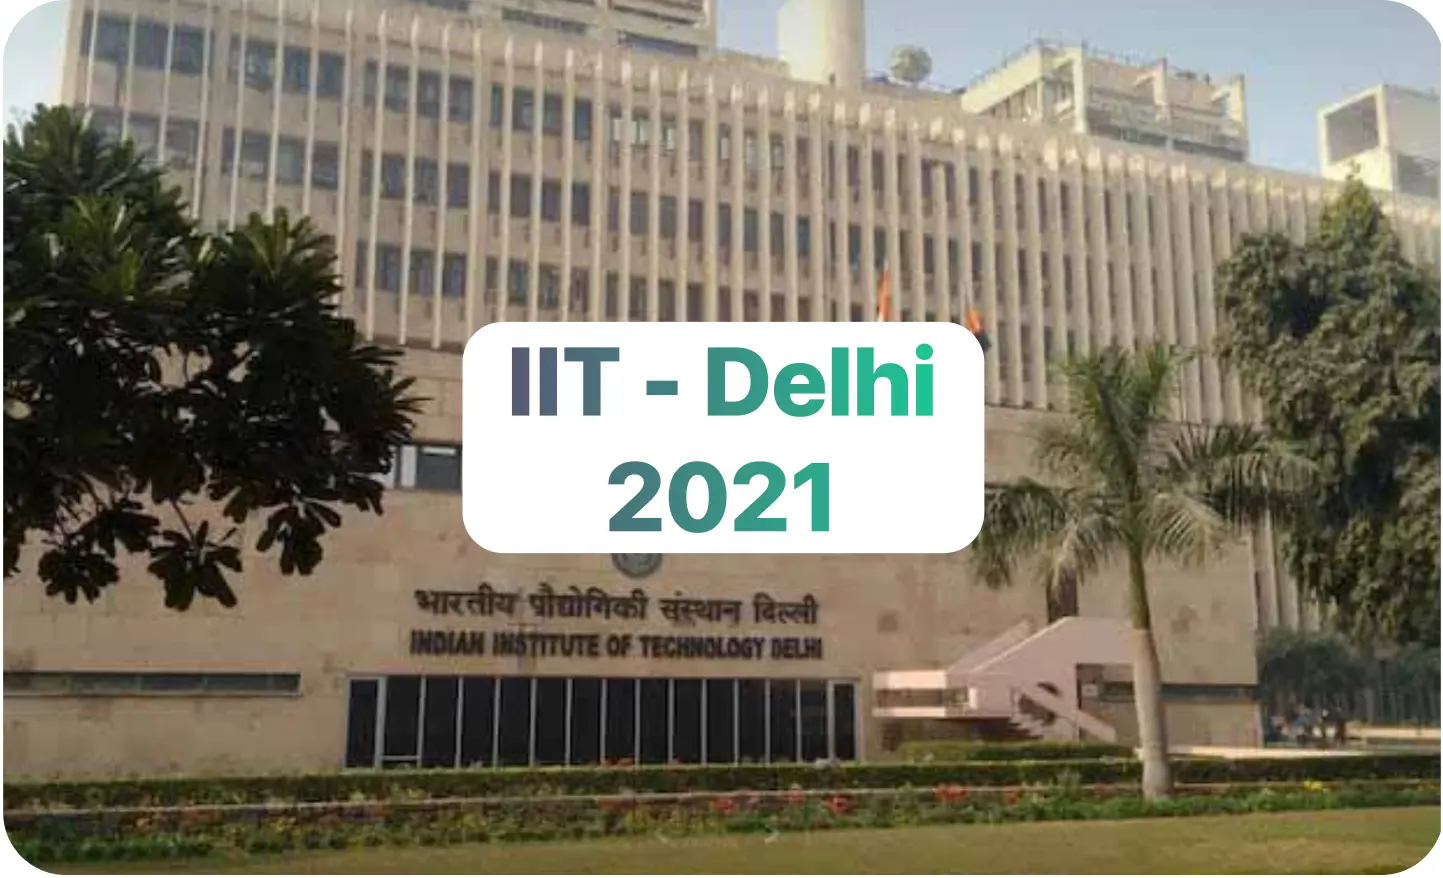 Indian Institute of Technology Delhi at No. 2 position among all IITs in India.